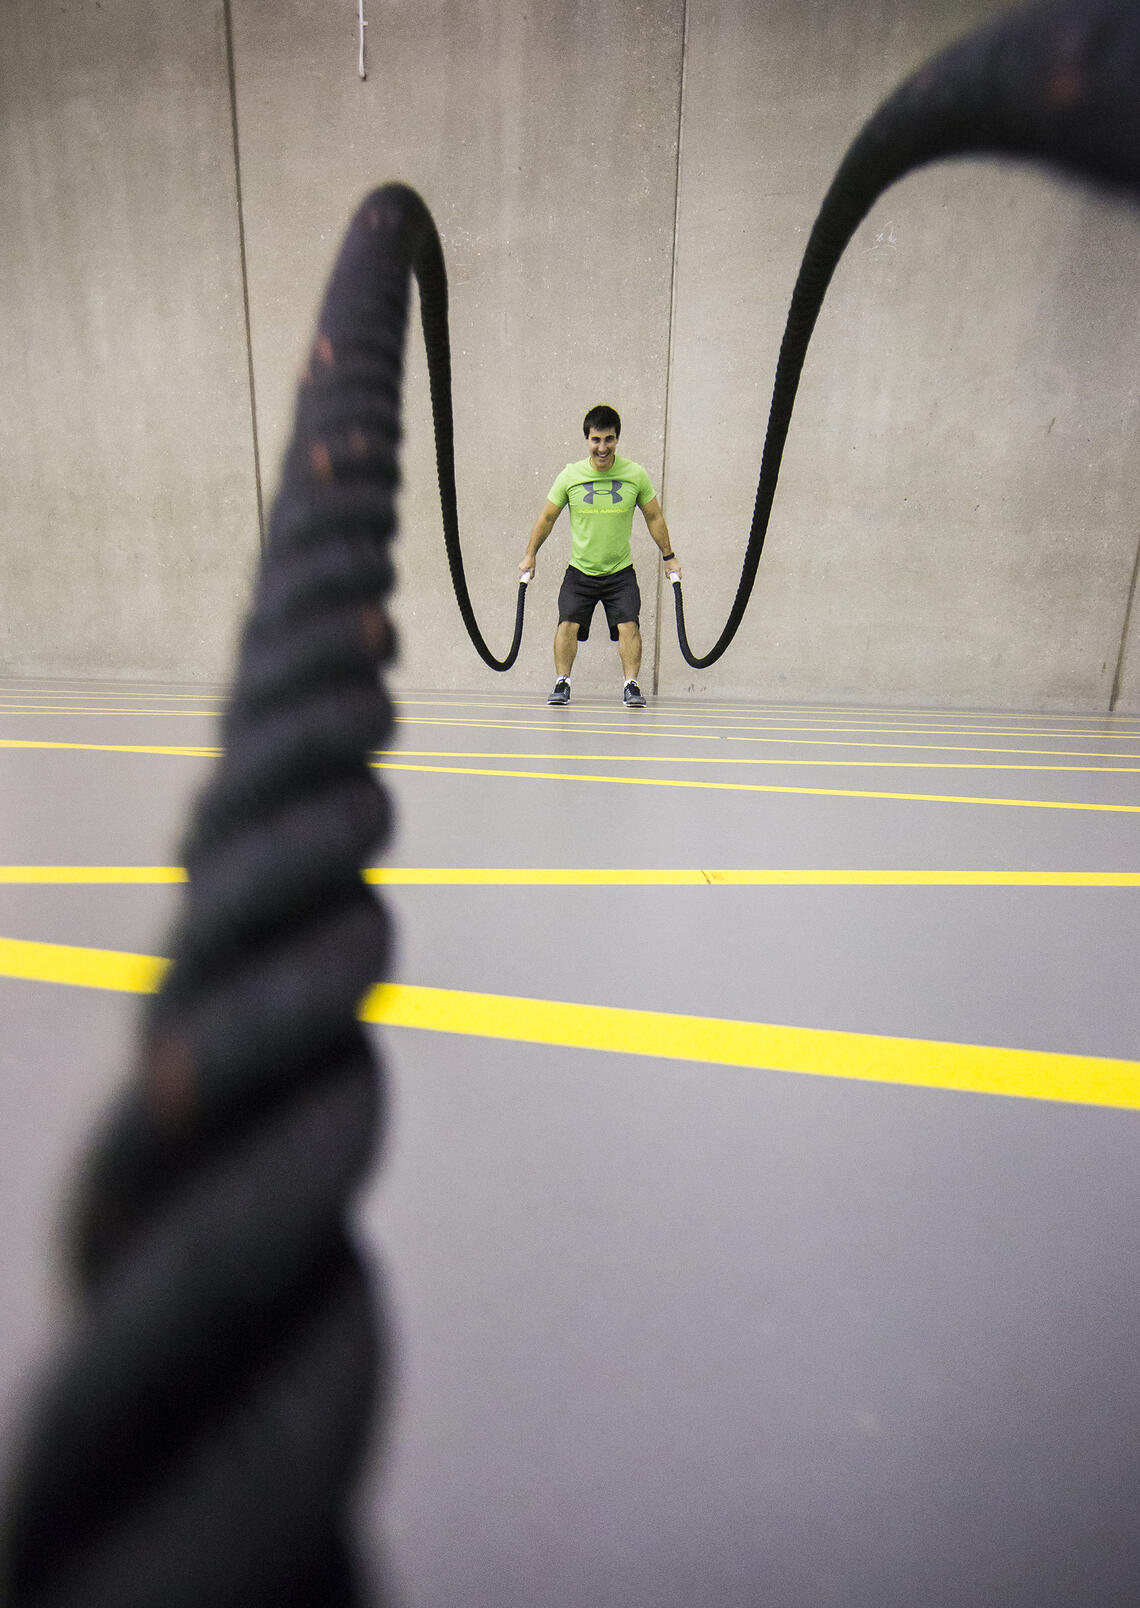 battle rope workout in the fitness centre track area